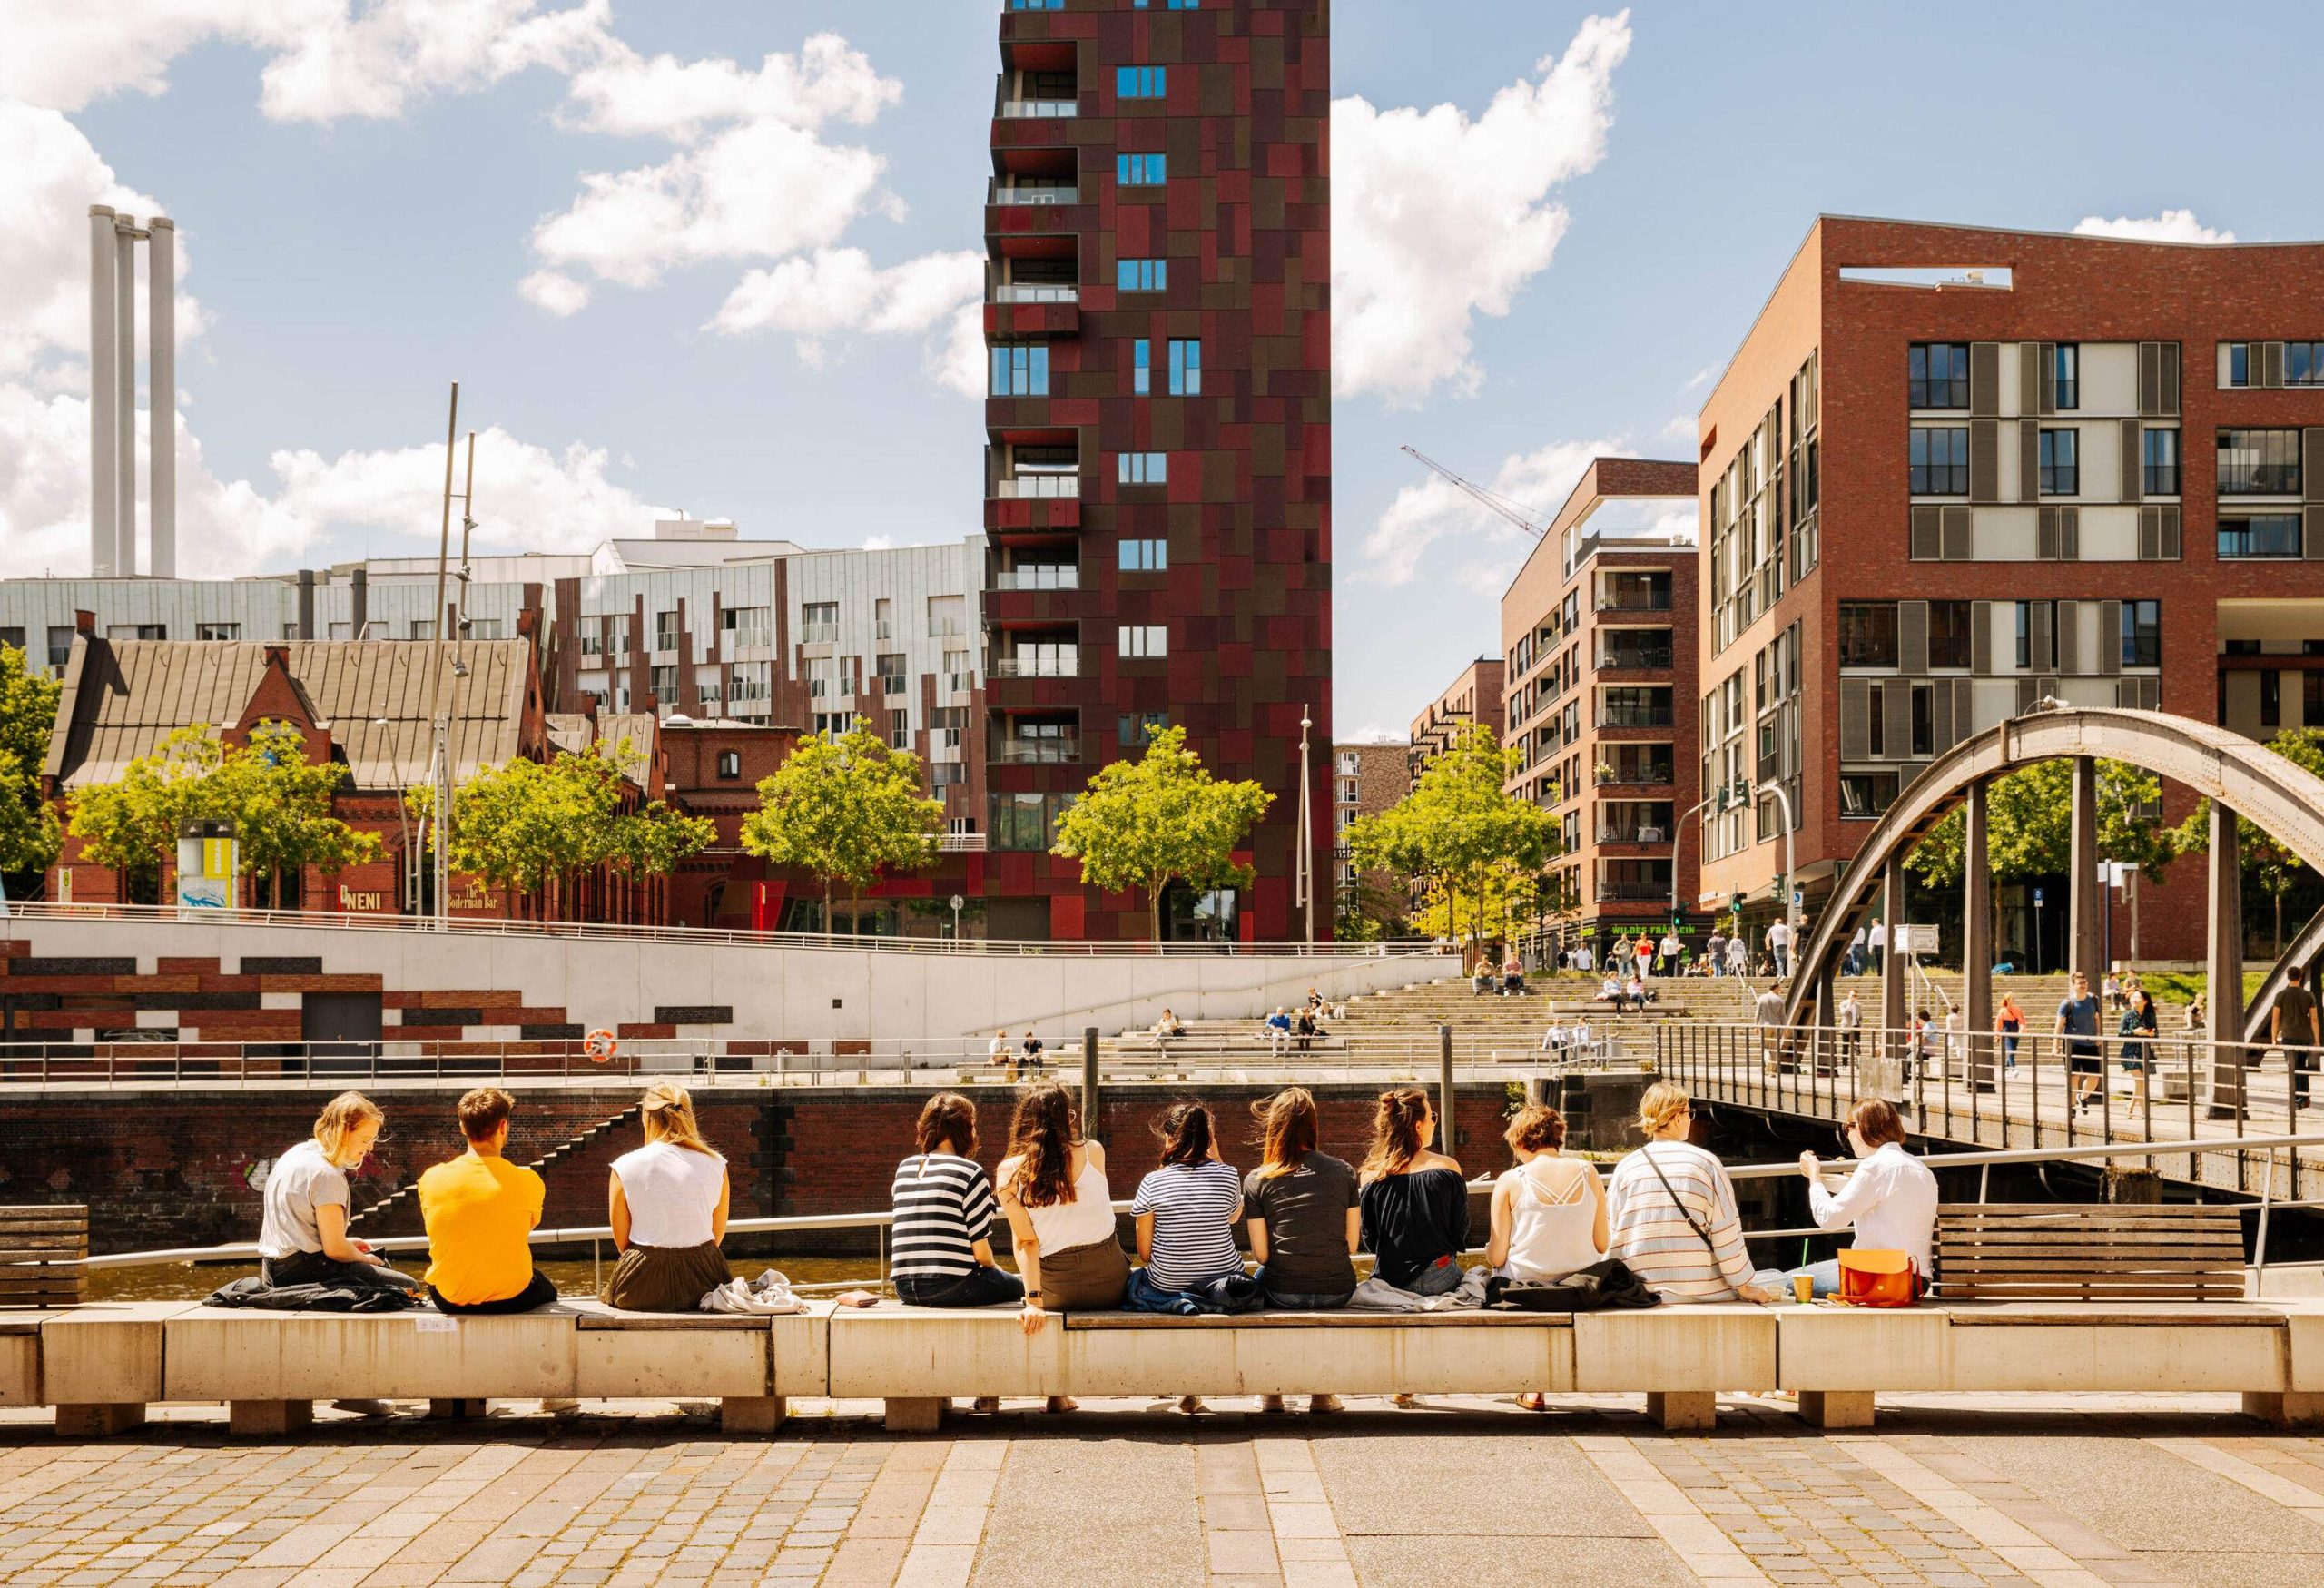 People leisurely sit along a long bench on a river promenade, enjoying the scenic view of buildings and trees across the river.